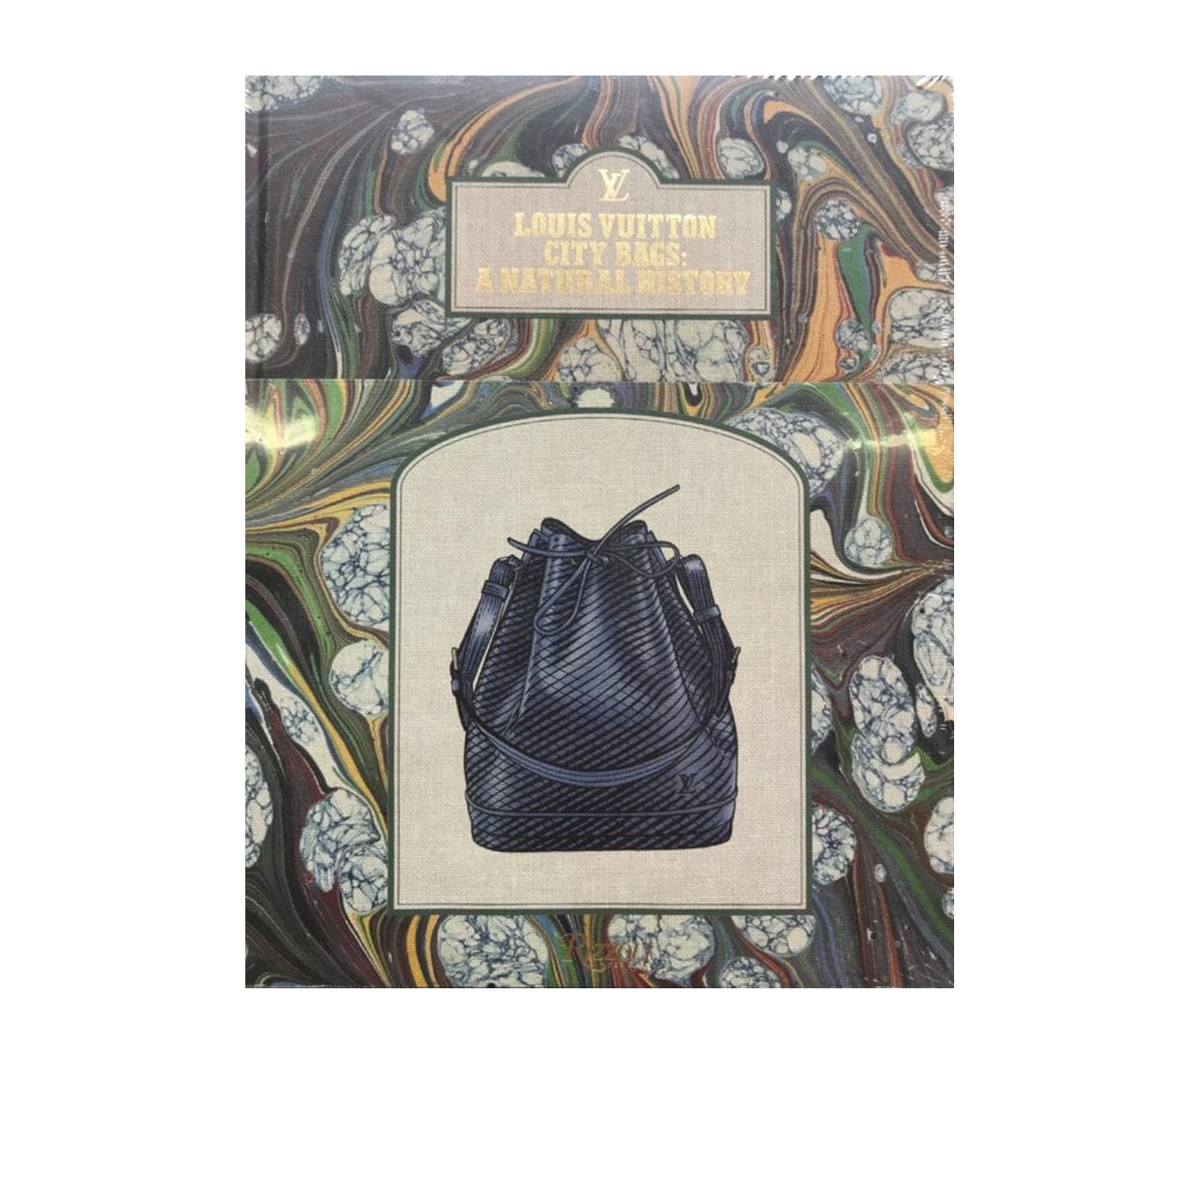 Louis Vitton City Bags-A Natural History Coffee Table Book